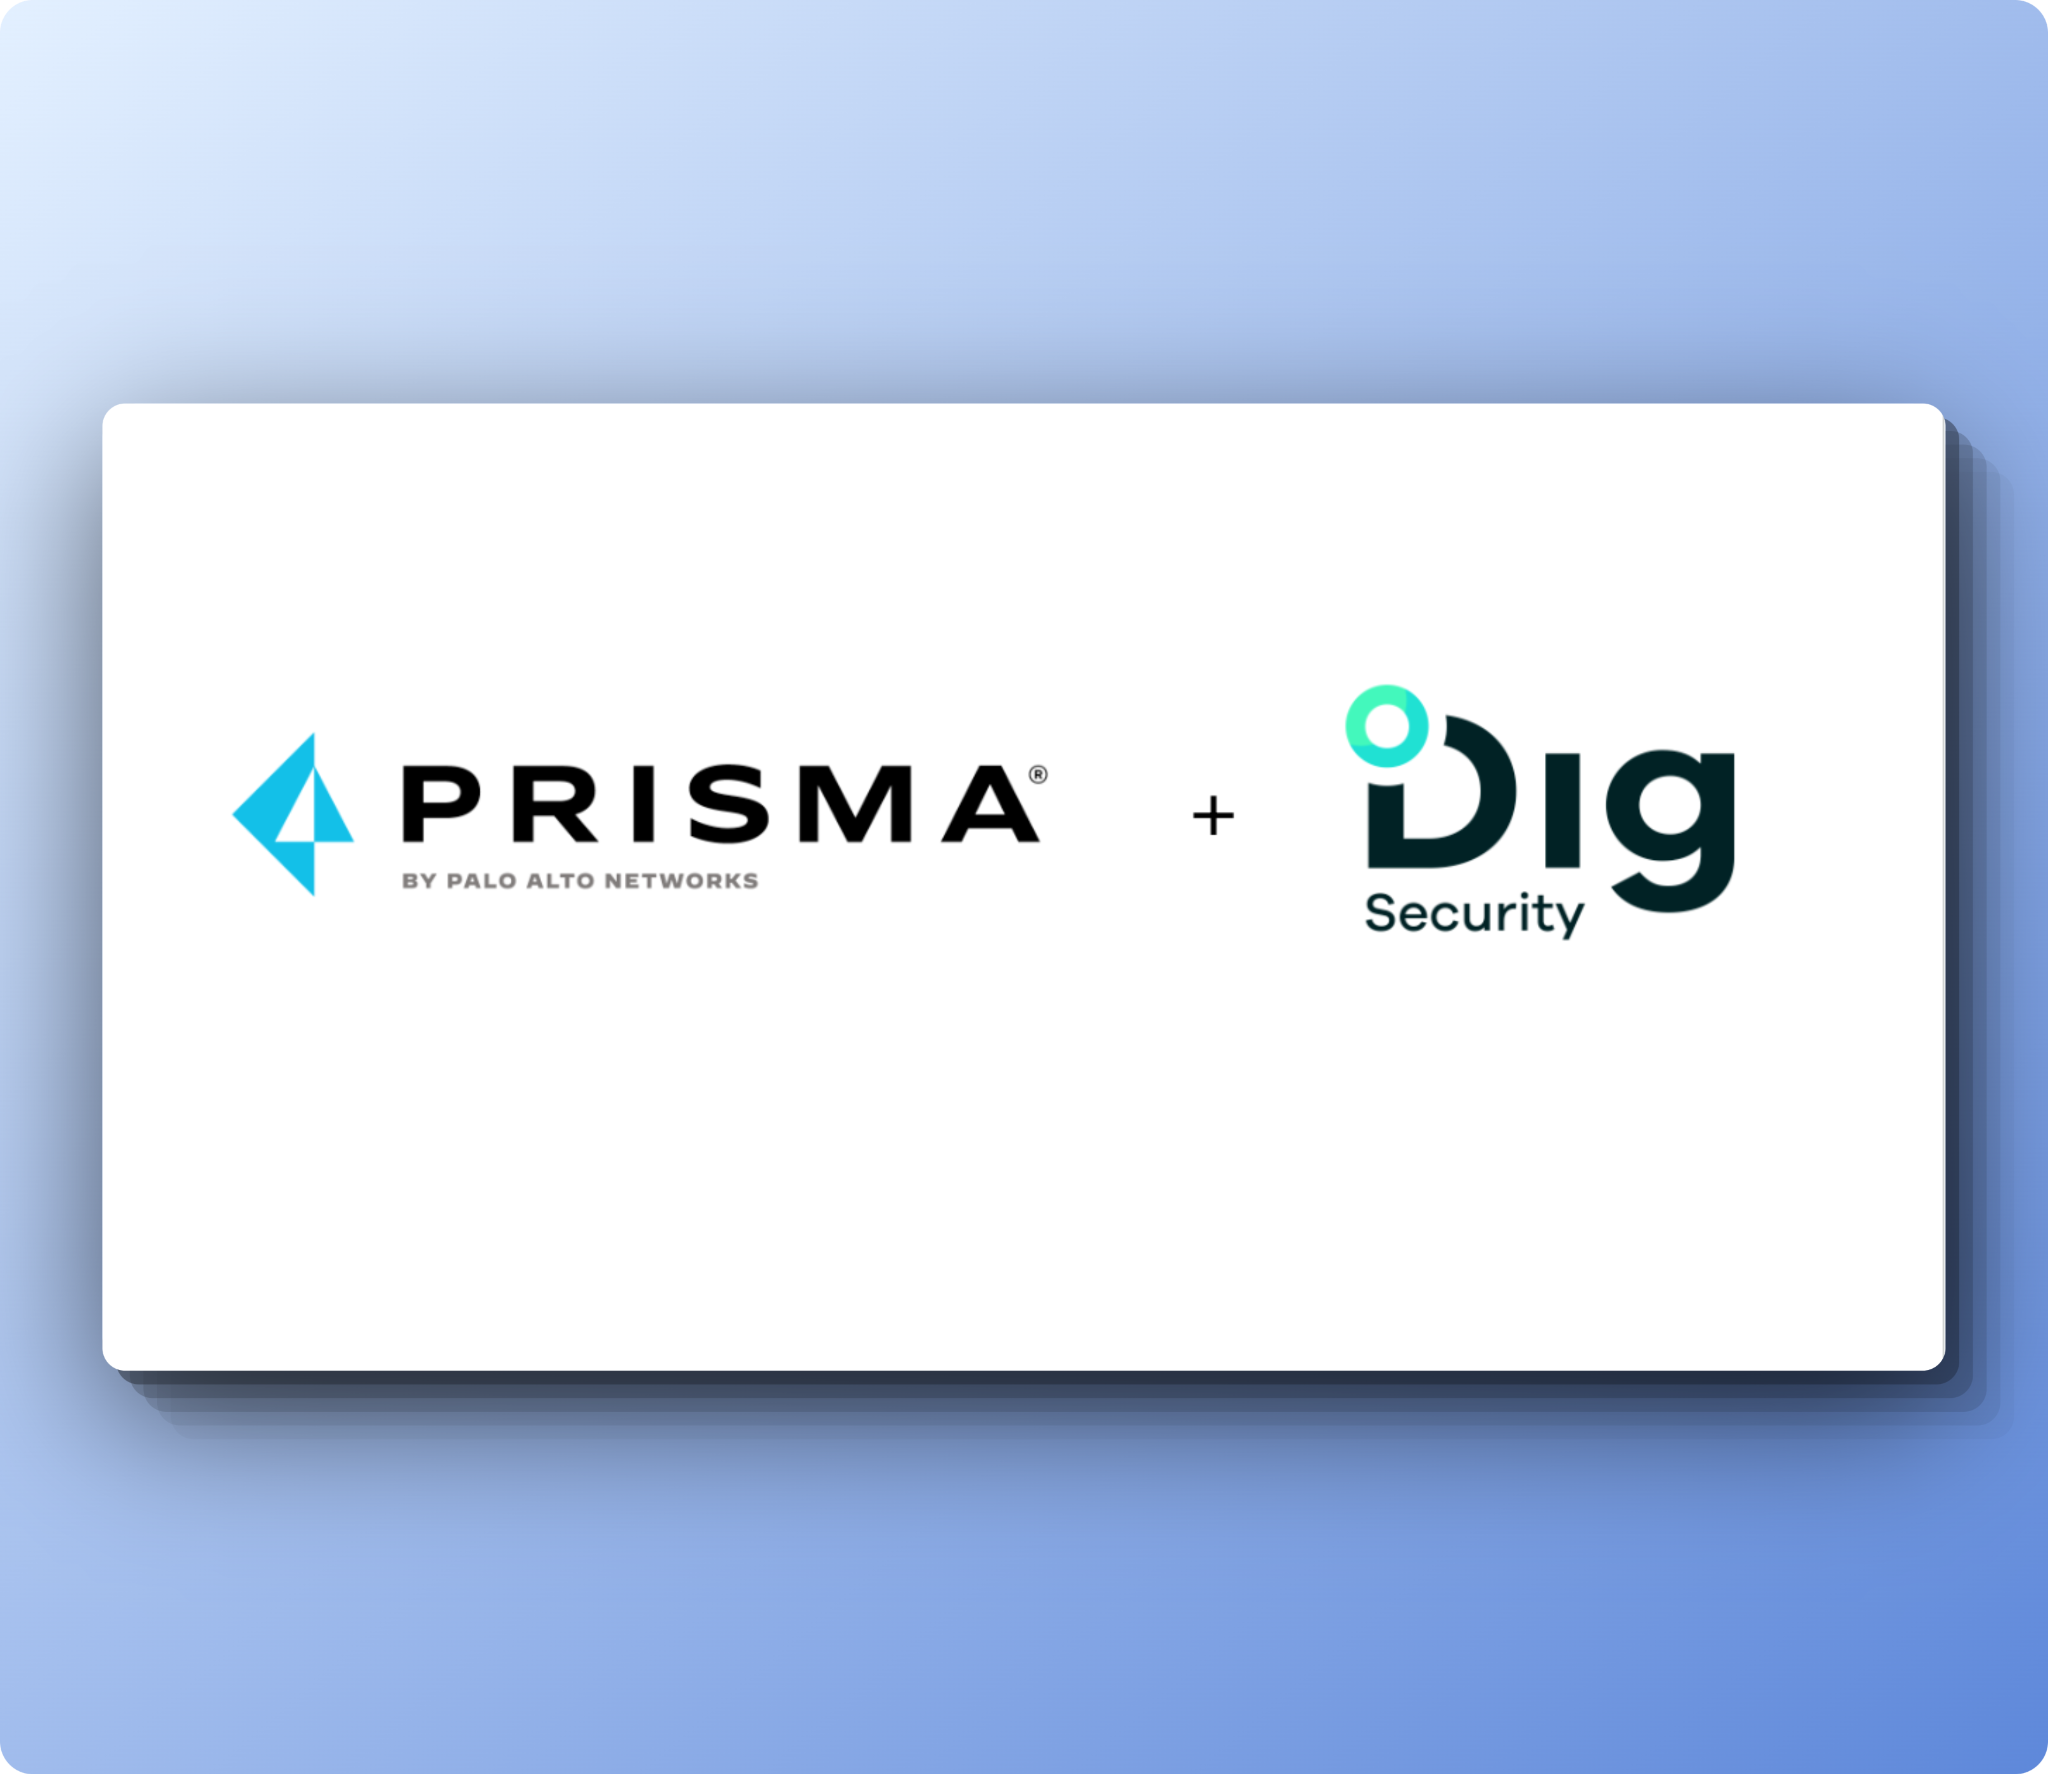 Prisma by Palo Alto Networks and Dig Security.